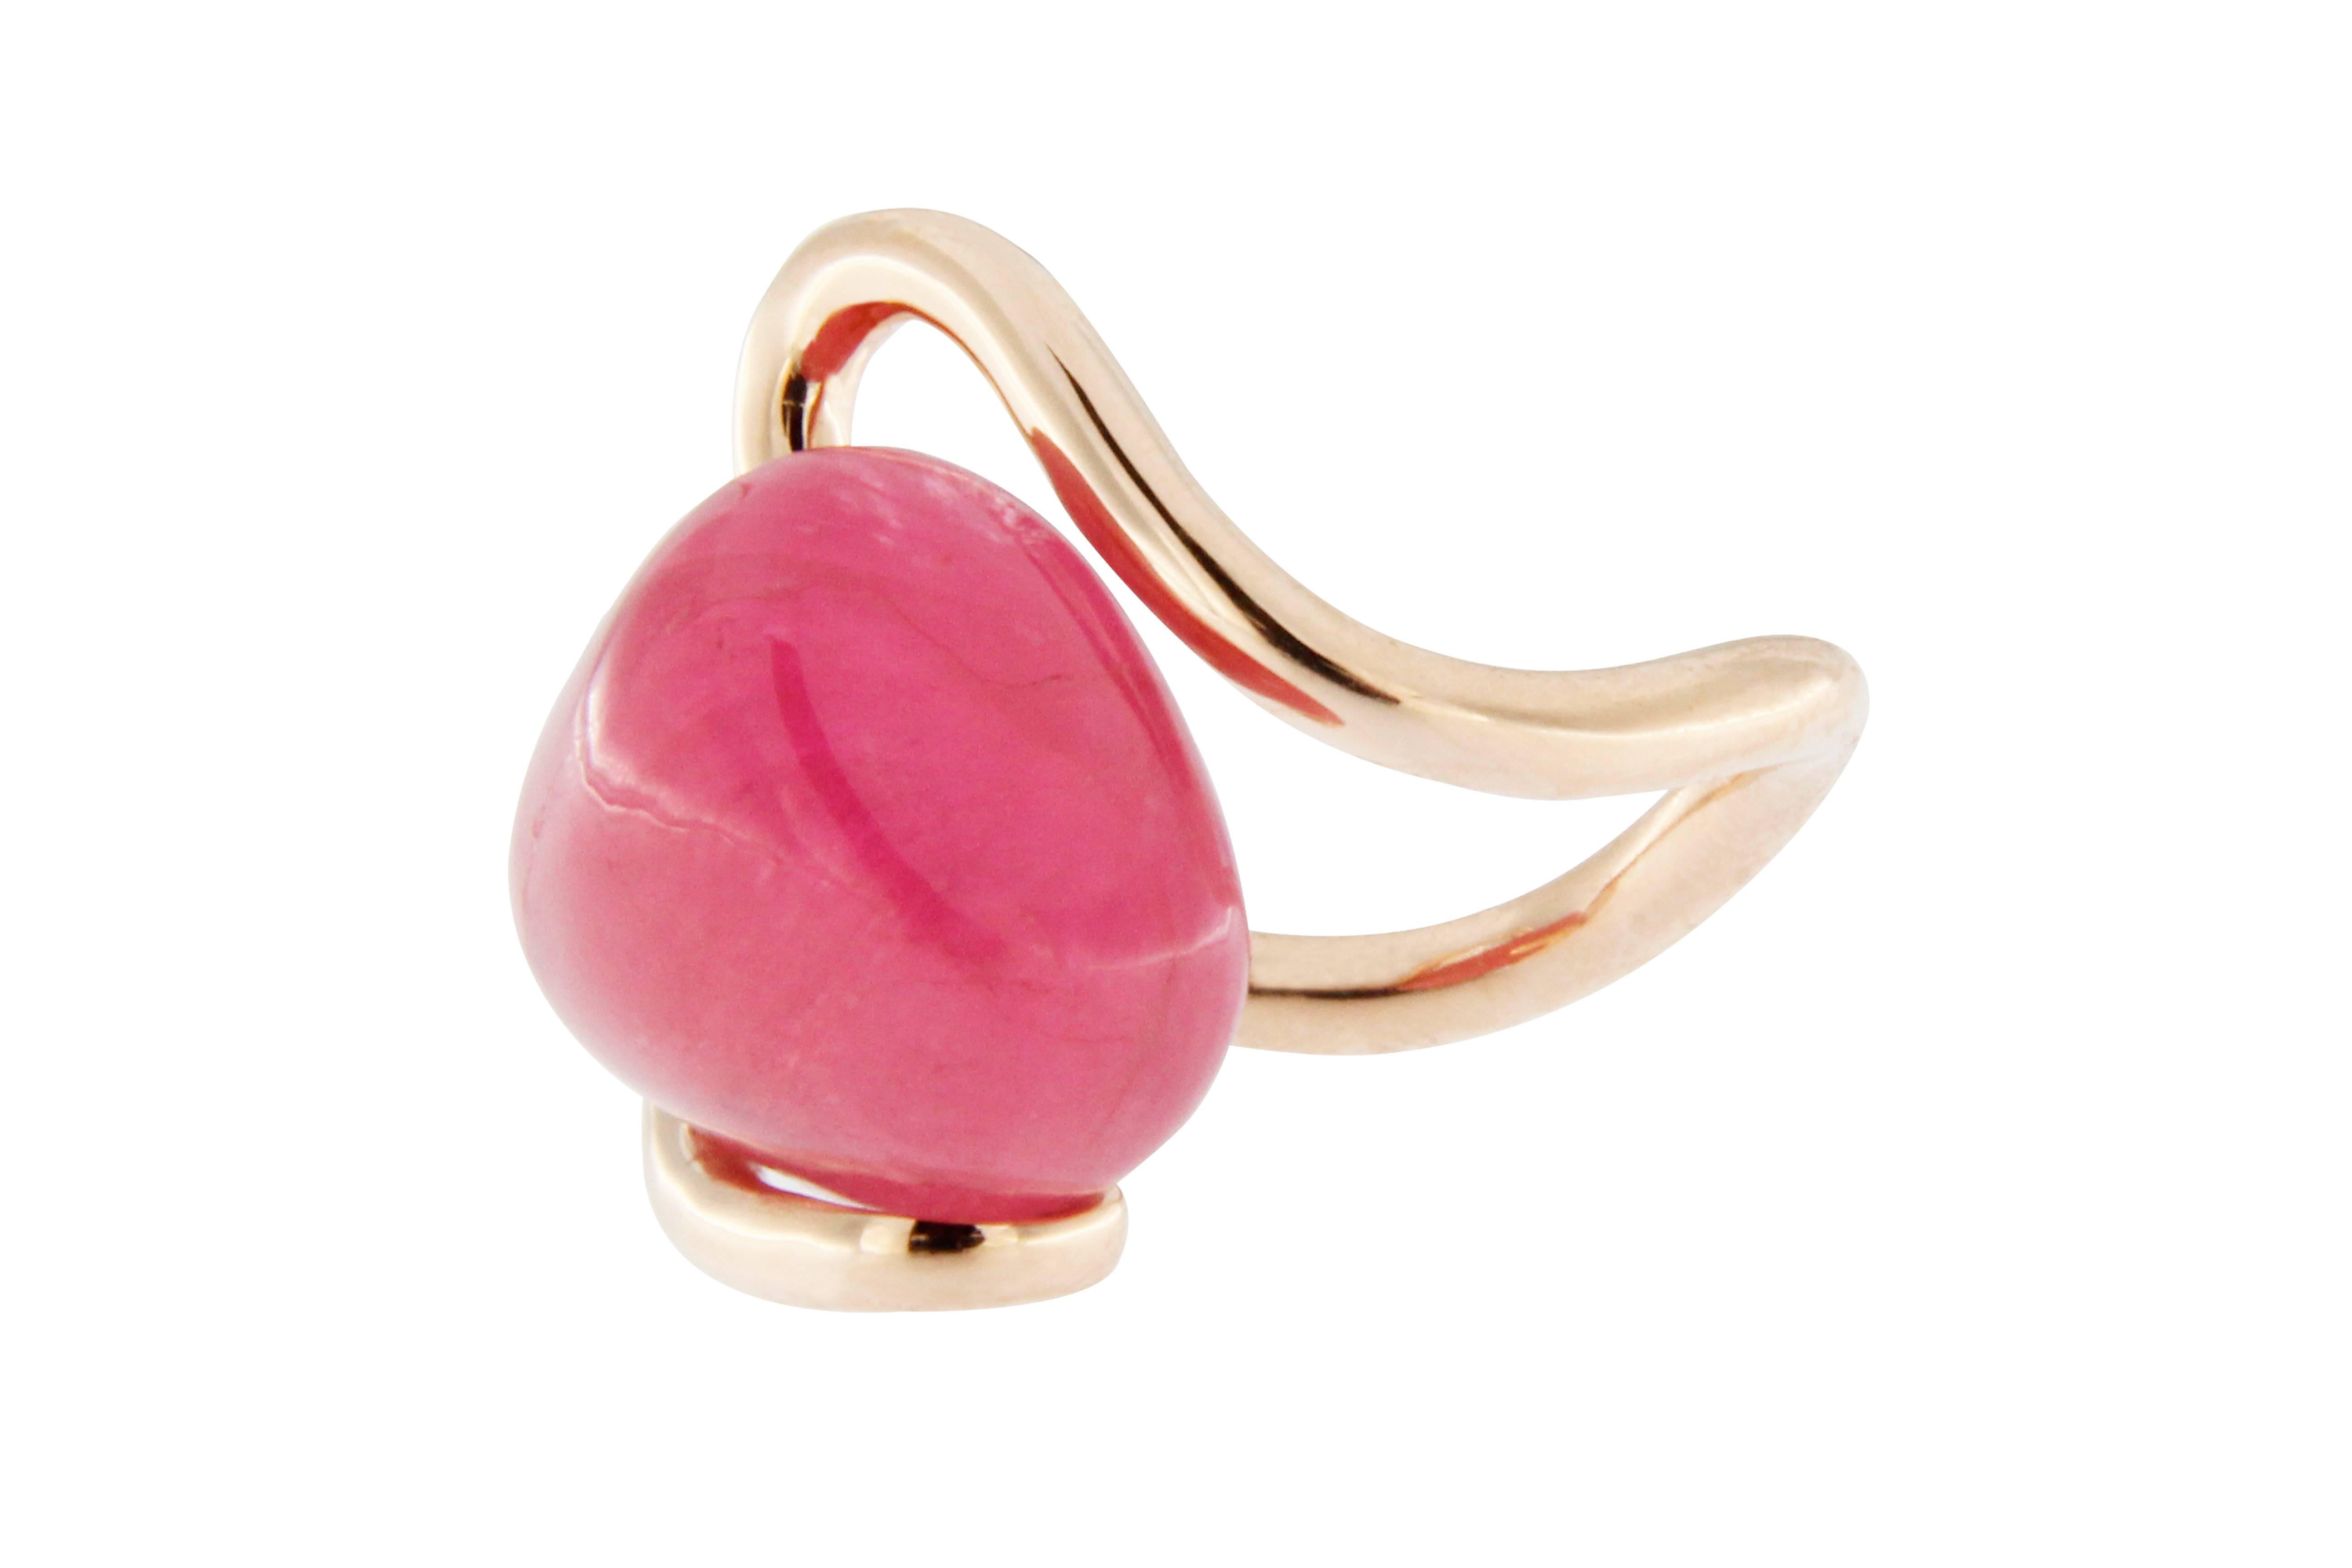 Jona design collection, hand crafted in Italy, 18 karat rose gold free organic shape ring, centering a 20.55 carat pink tourmaline pebble set between two yellow gold waves. Signed Jona. US size 7 (can be sized). Dimensions: 1.2 in. H x 0.9 in. W x